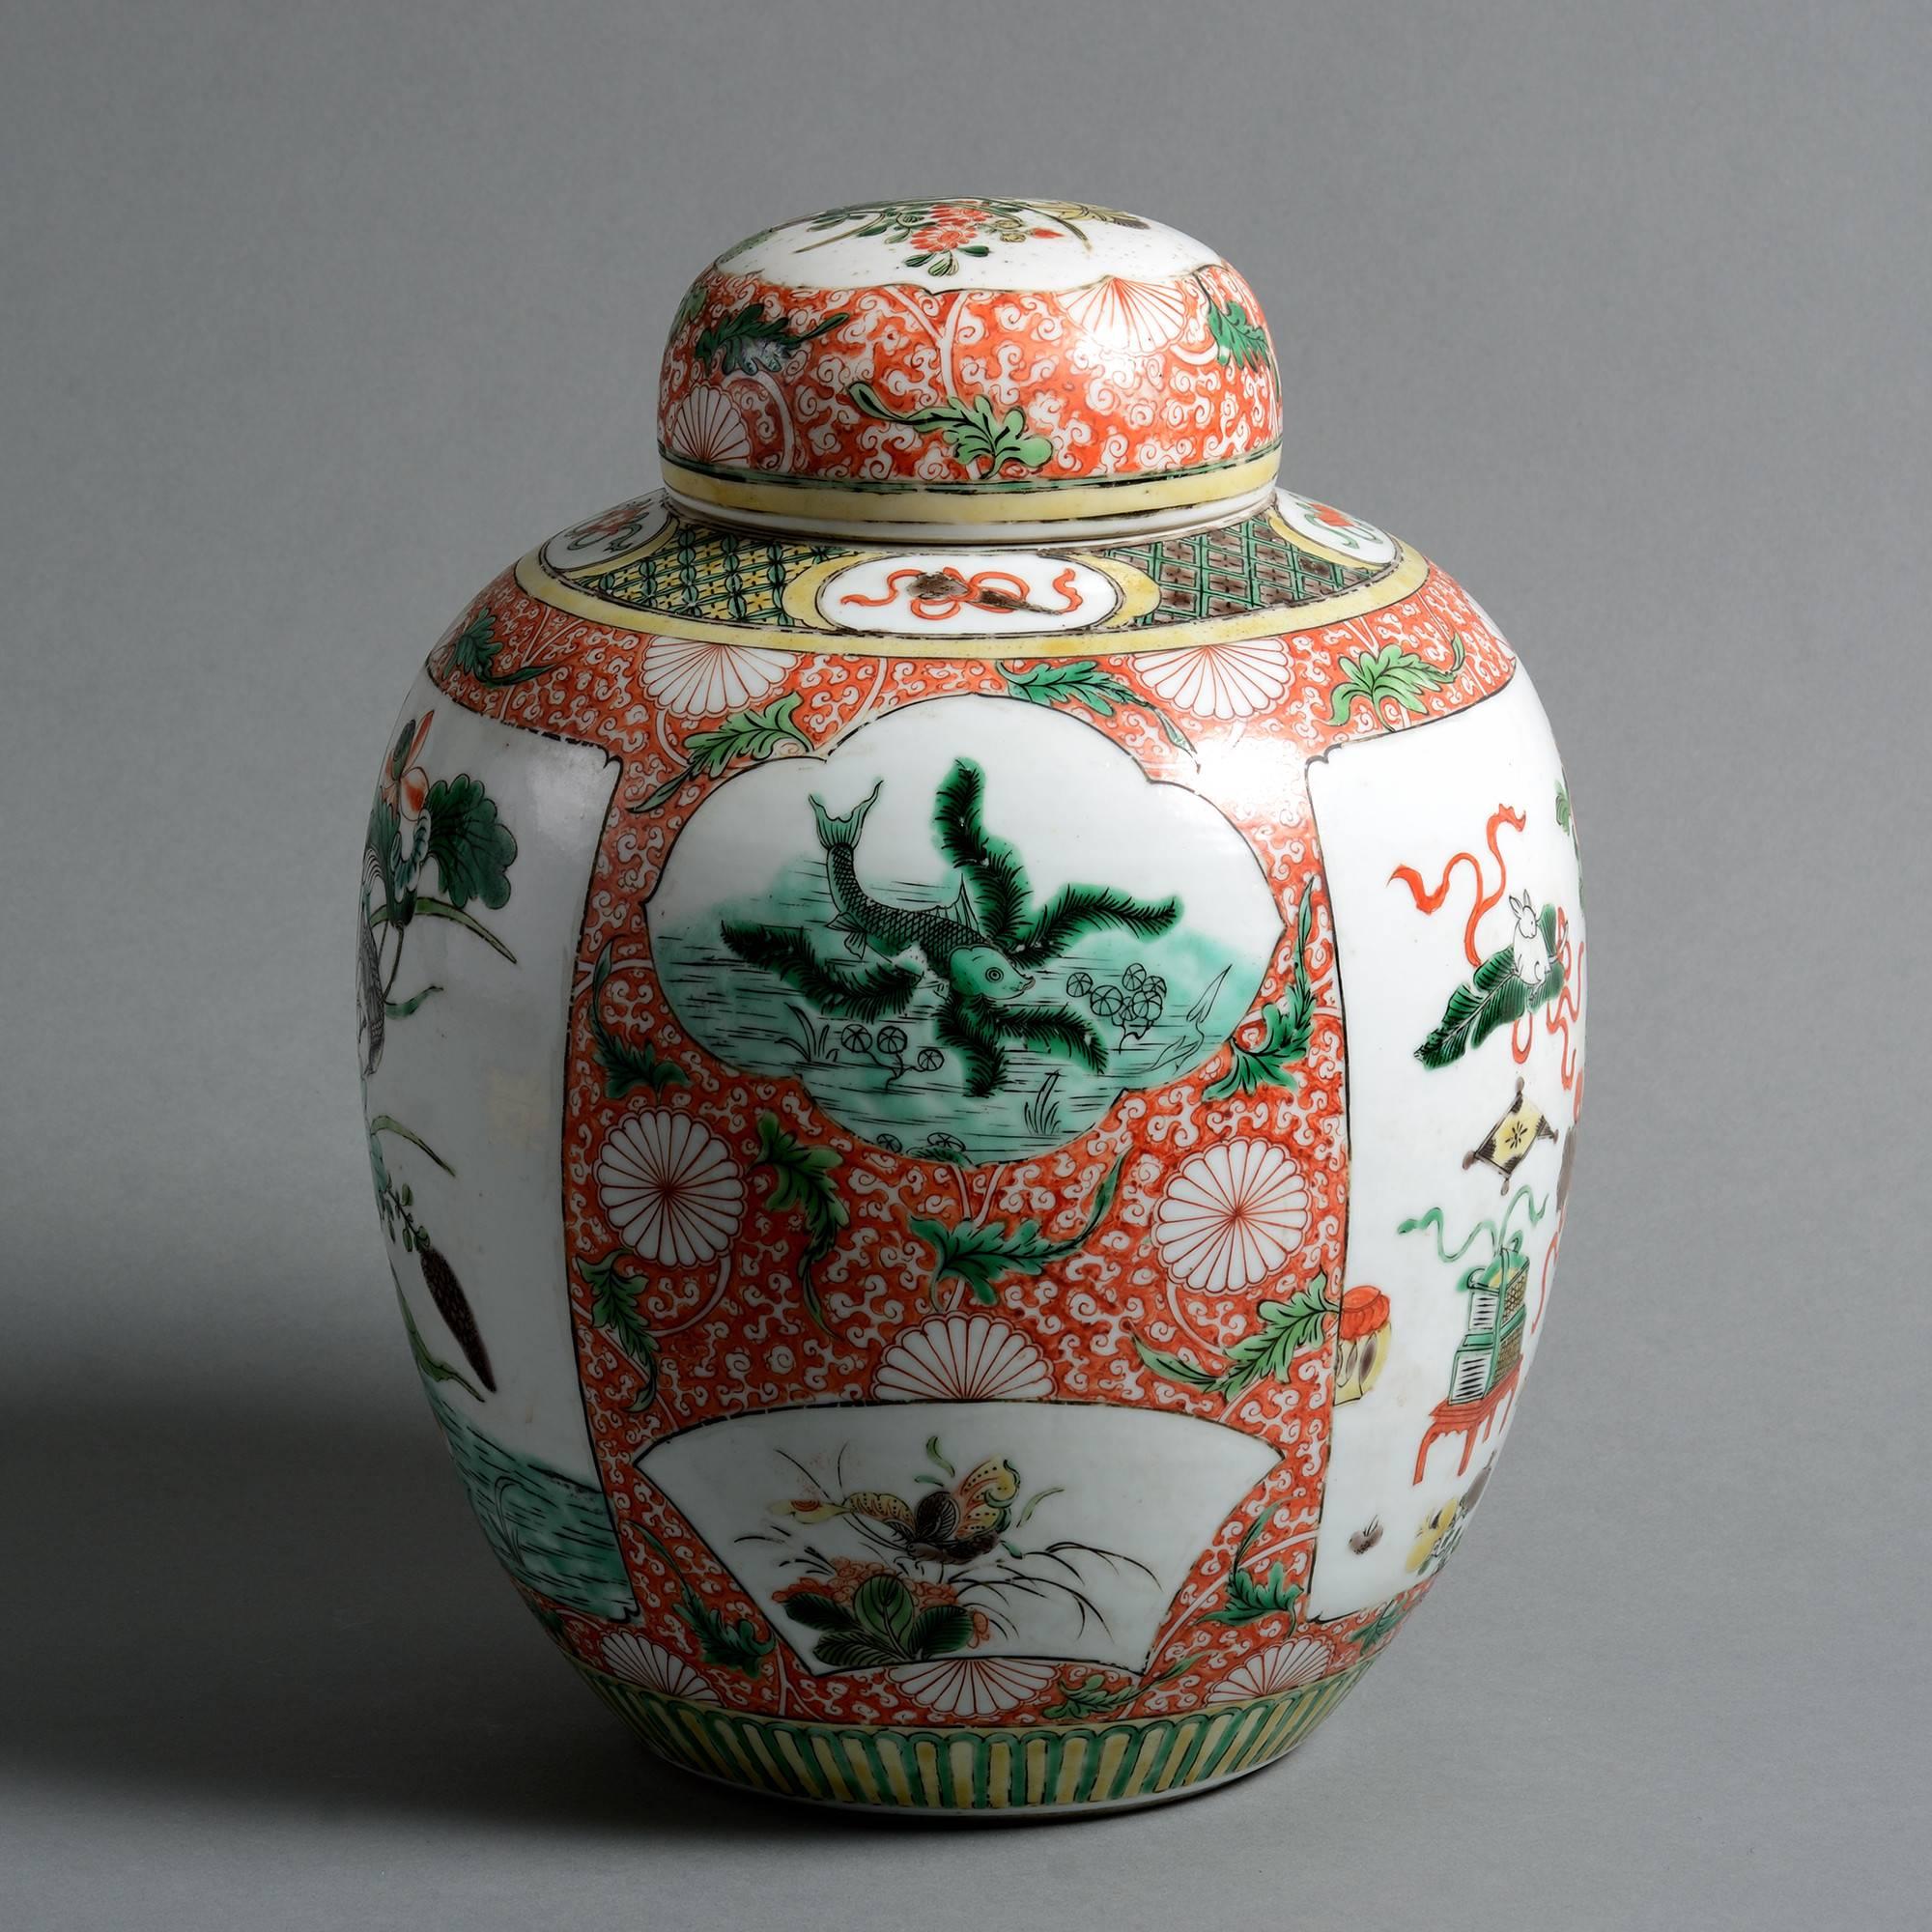 A late 19th century Famille verte jar with cover, of bulbous form, with cartouches depicting antiques, flowers, birds and insects set upon a ground of coral red and white vermicelli.

Qing Dynasty, Guangxu period.